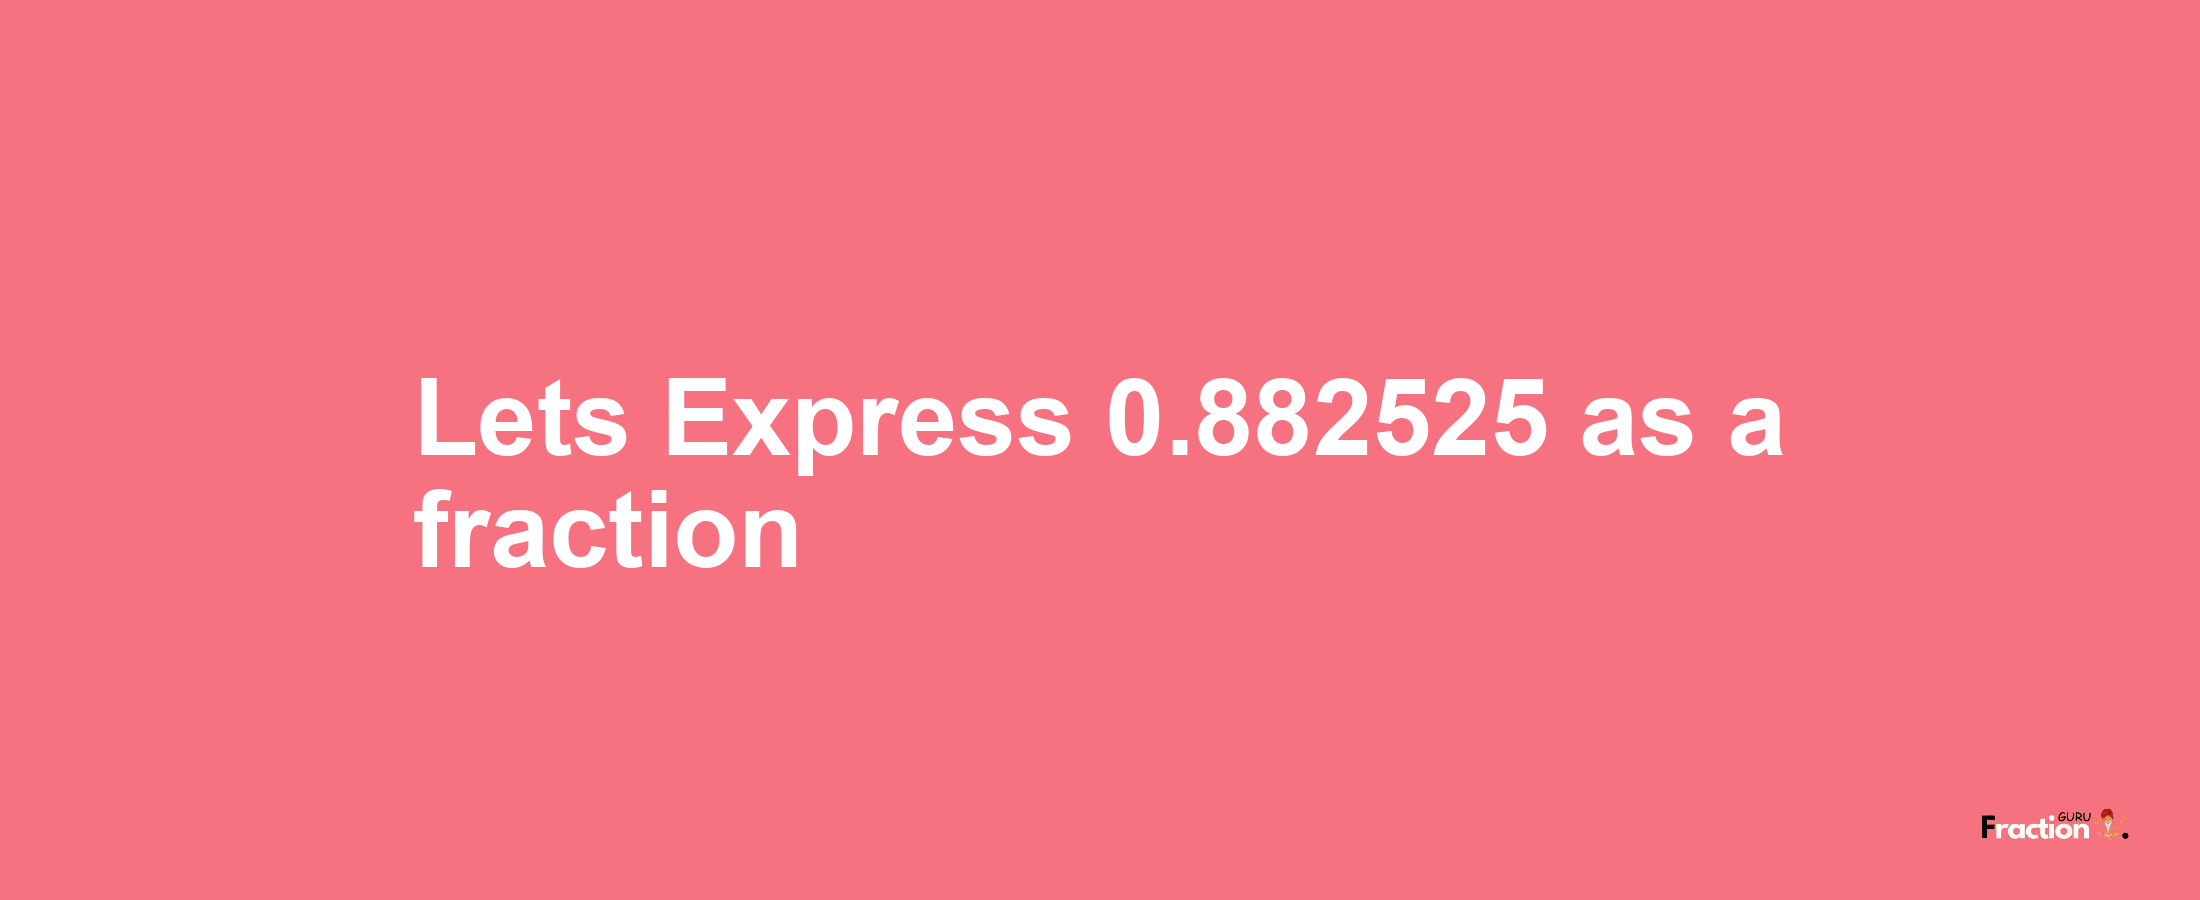 Lets Express 0.882525 as afraction